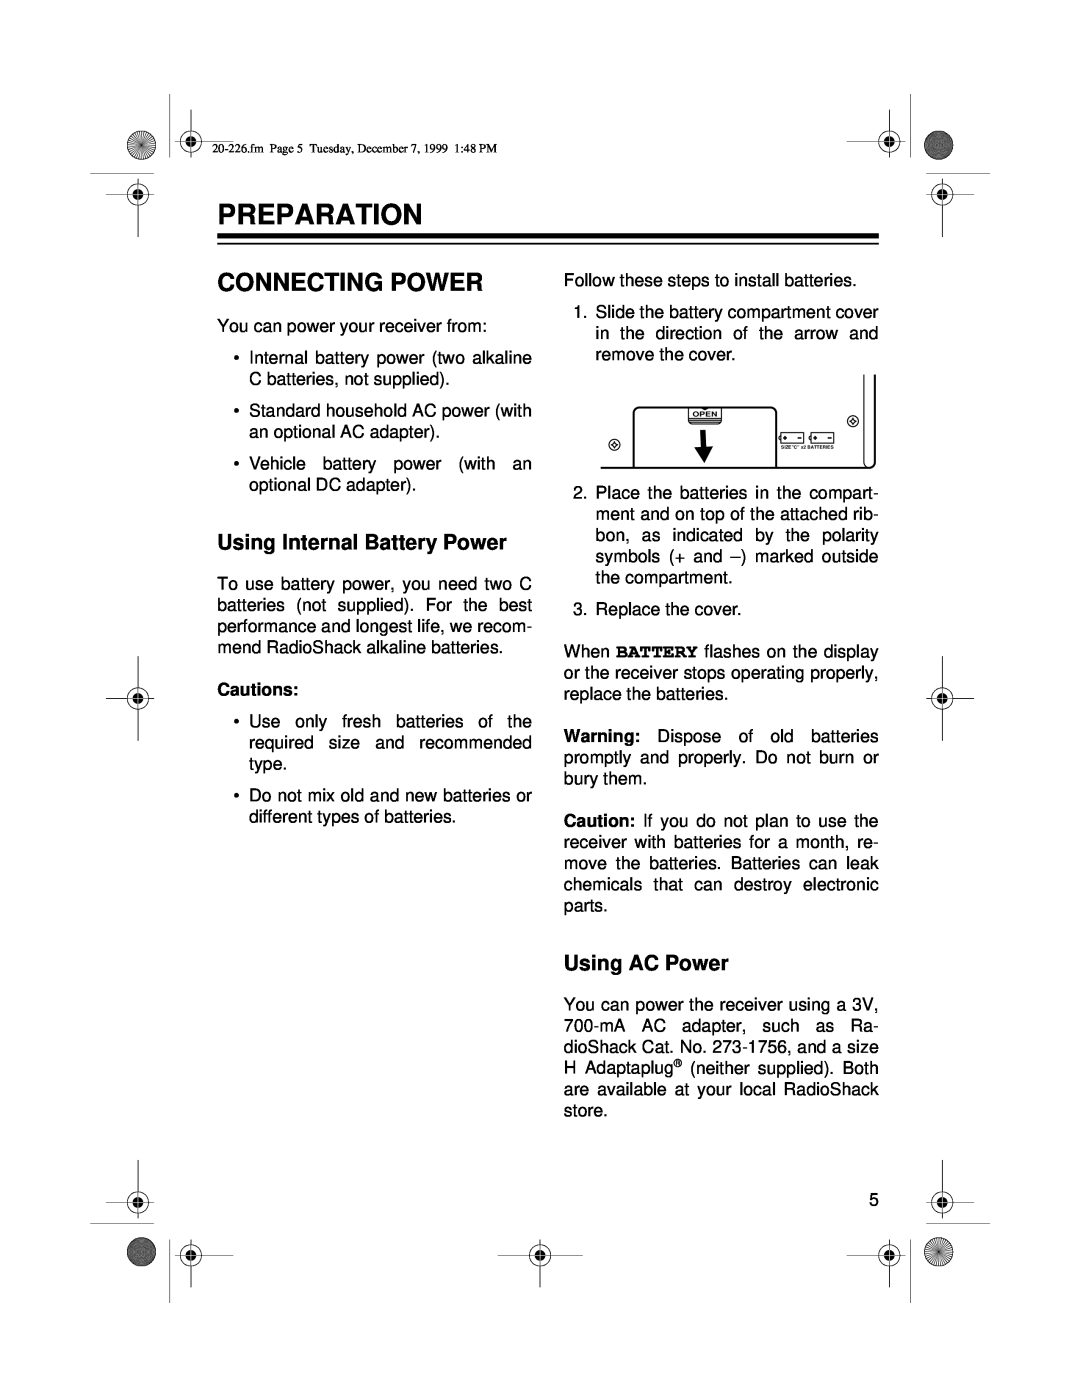 Radio Shack DX-396 owner manual Preparation, Connecting Power, Using Internal Battery Power, Using AC Power 